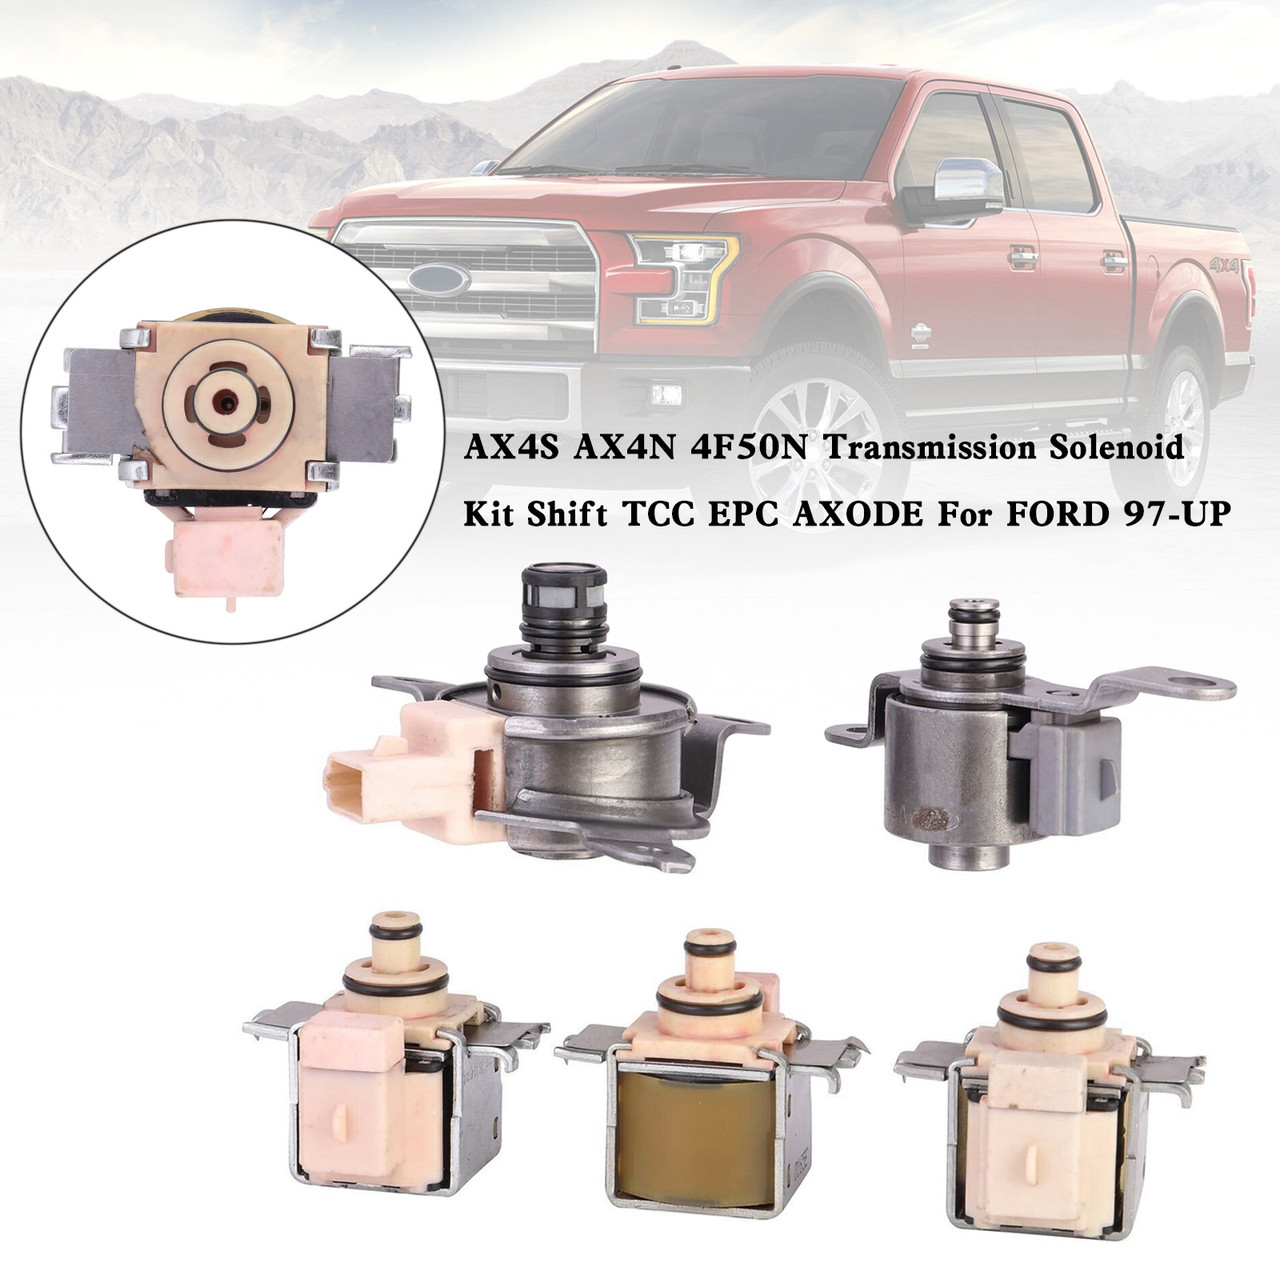 AX4S AX4N 4F50N Transmission Solenoid Kit Shift TCC EPC AXODE For FORD 97-UP